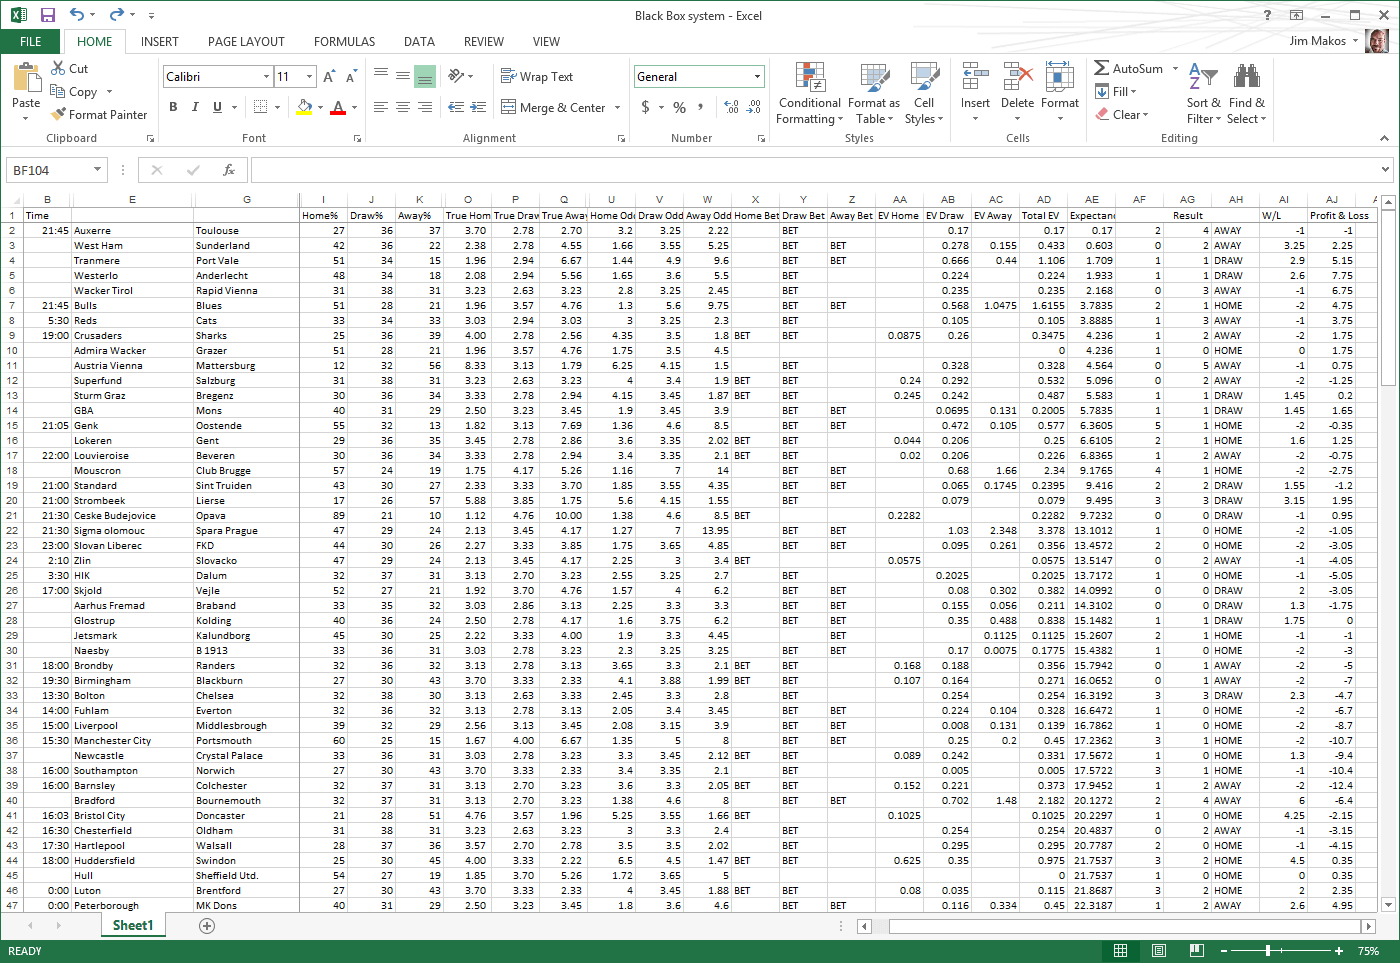 Betting Spreadsheet In Keep Track Of Your Betting Performance With An Excel Spreadsheet